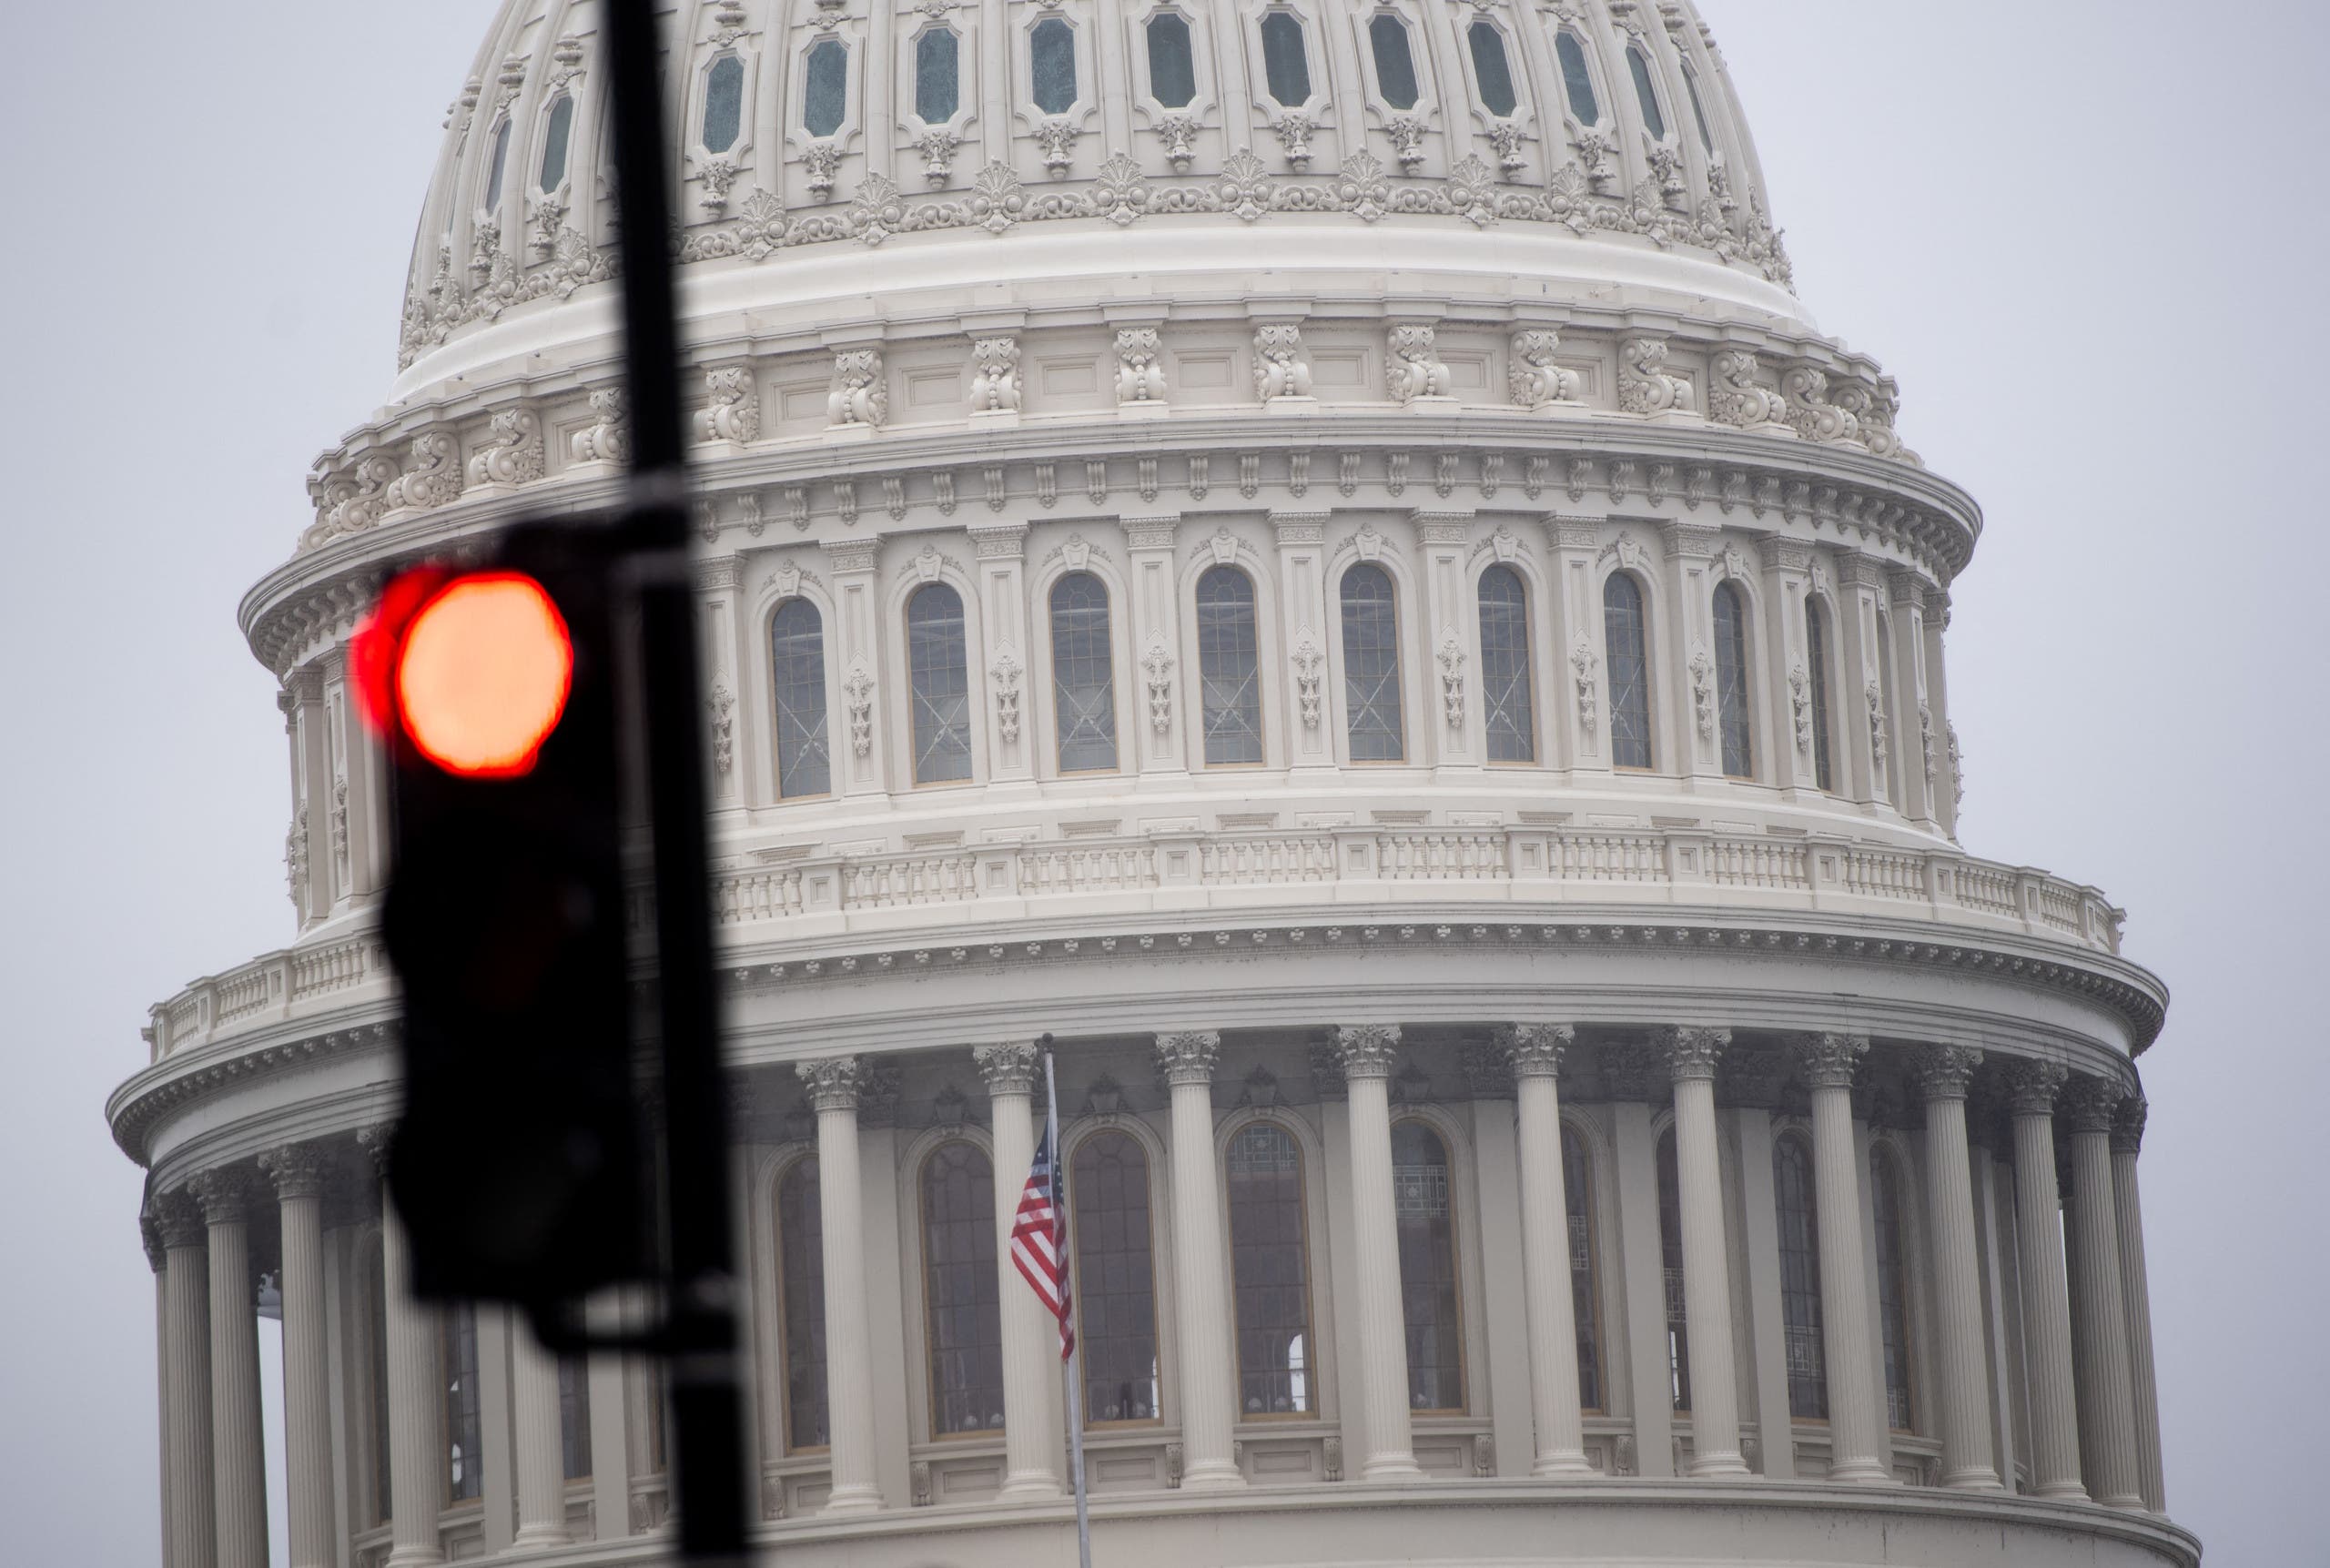 The US Capitol is seen in Washington, DC, March 23, 2020. (File photo: AFP)